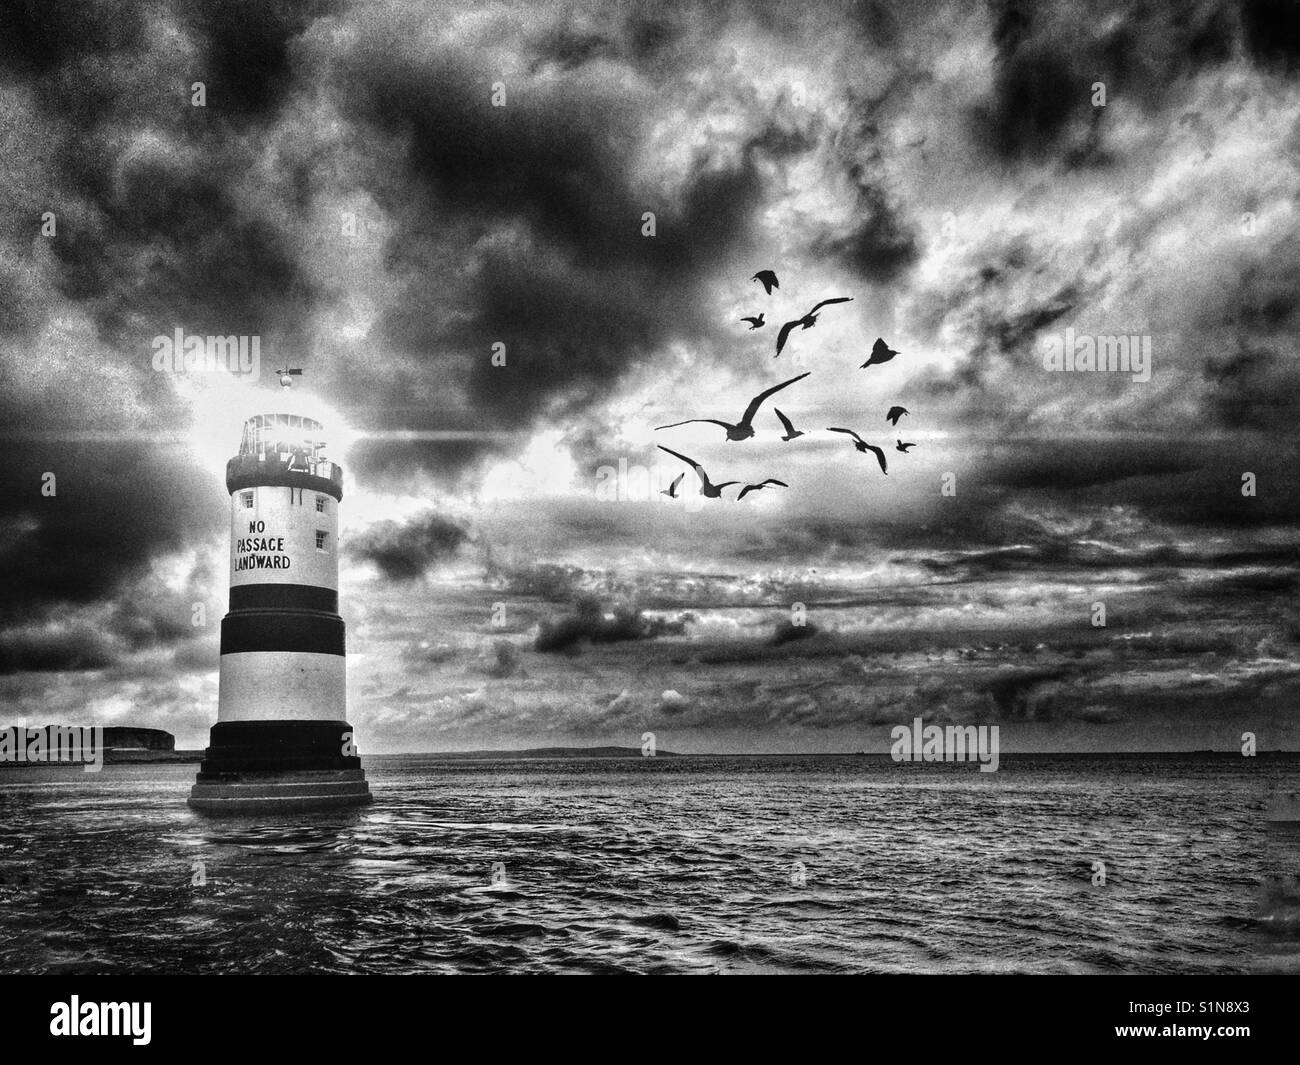 Penmon lighthouse off the coast of Anglesey. Conceptual image showing light and flock of gulls Stock Photo